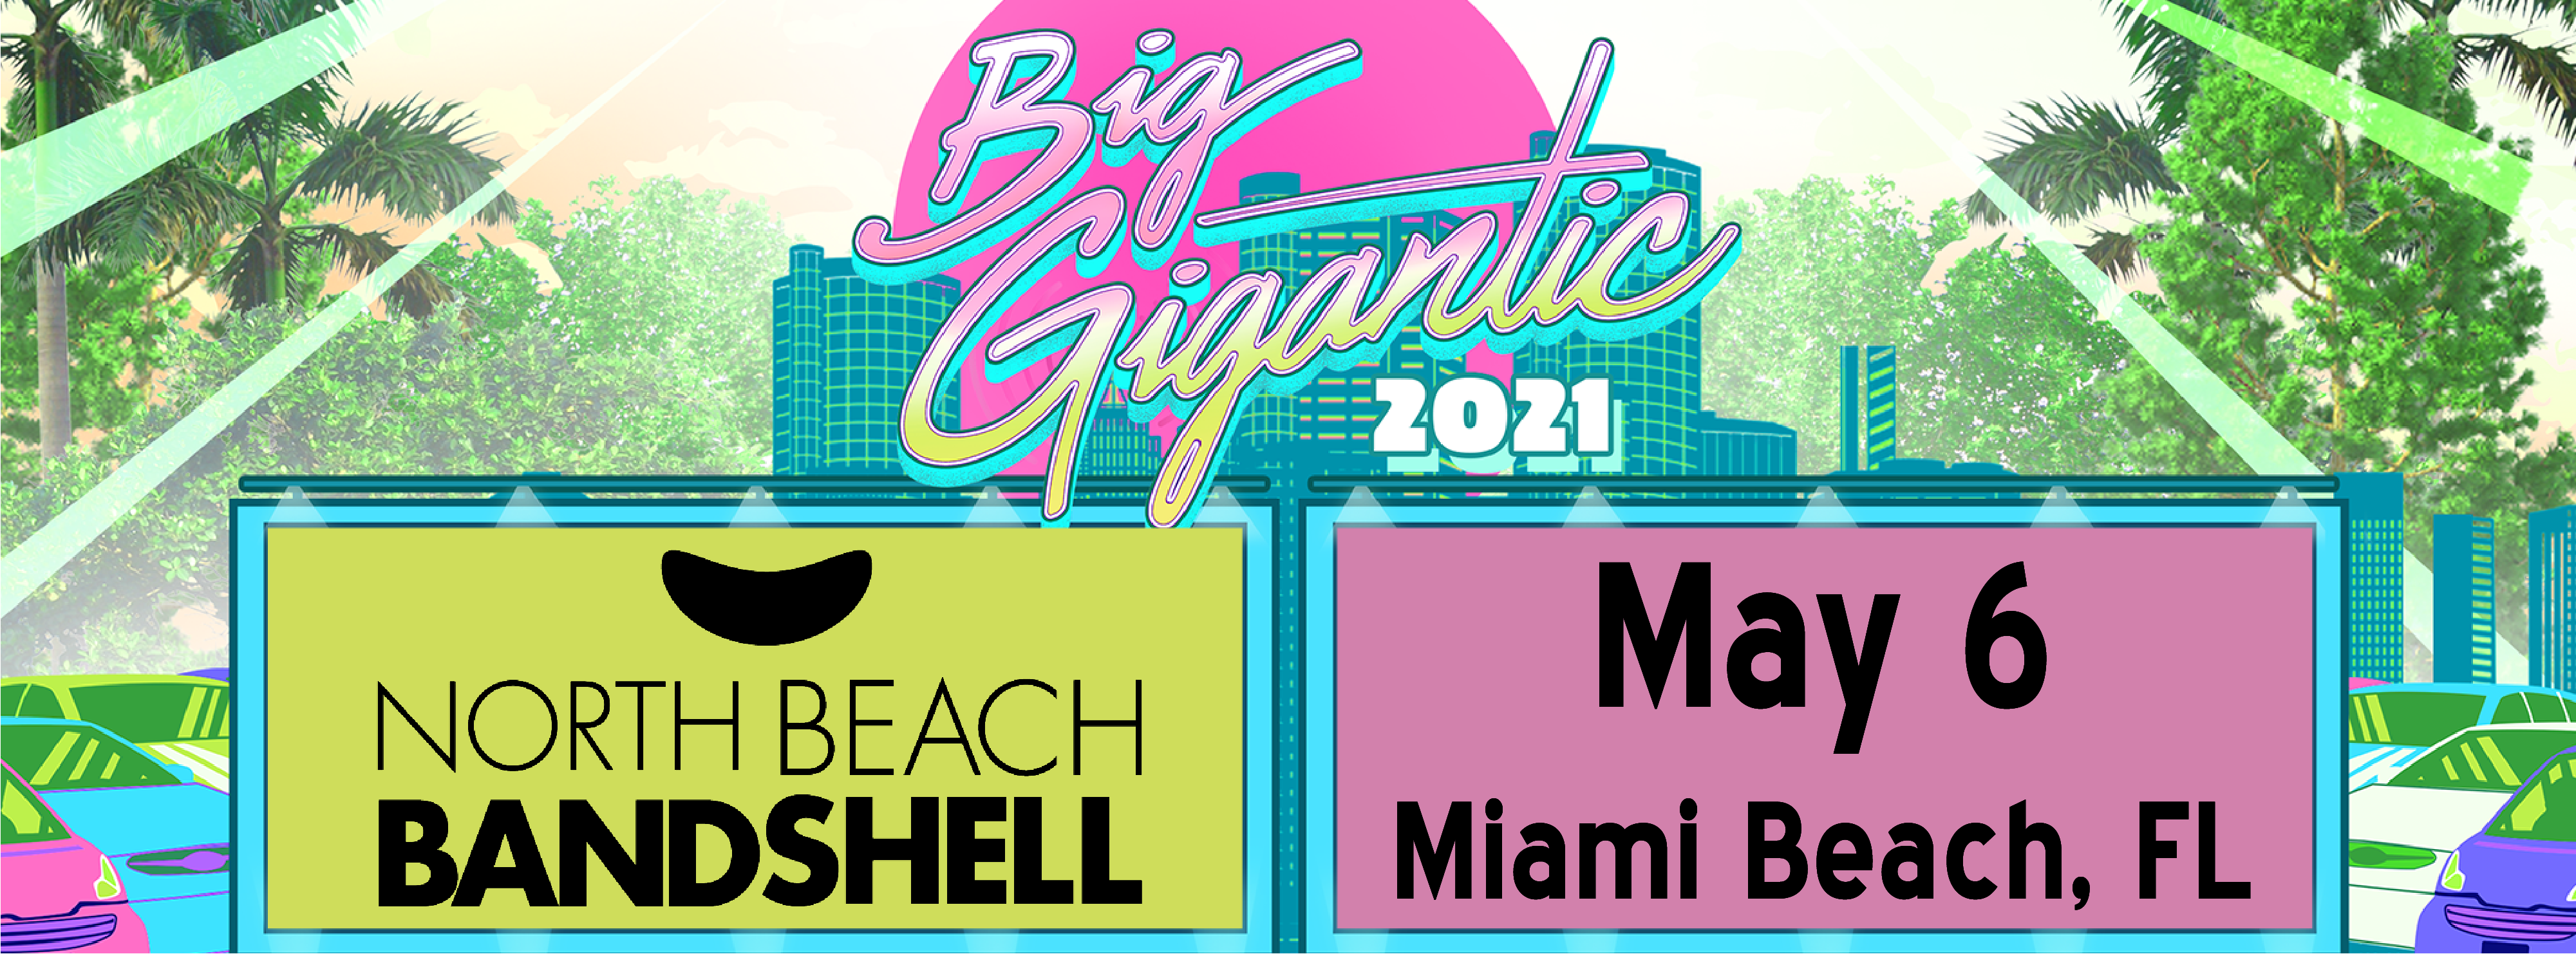 Big Gigantic at the North Beach Bandshell on 5/6